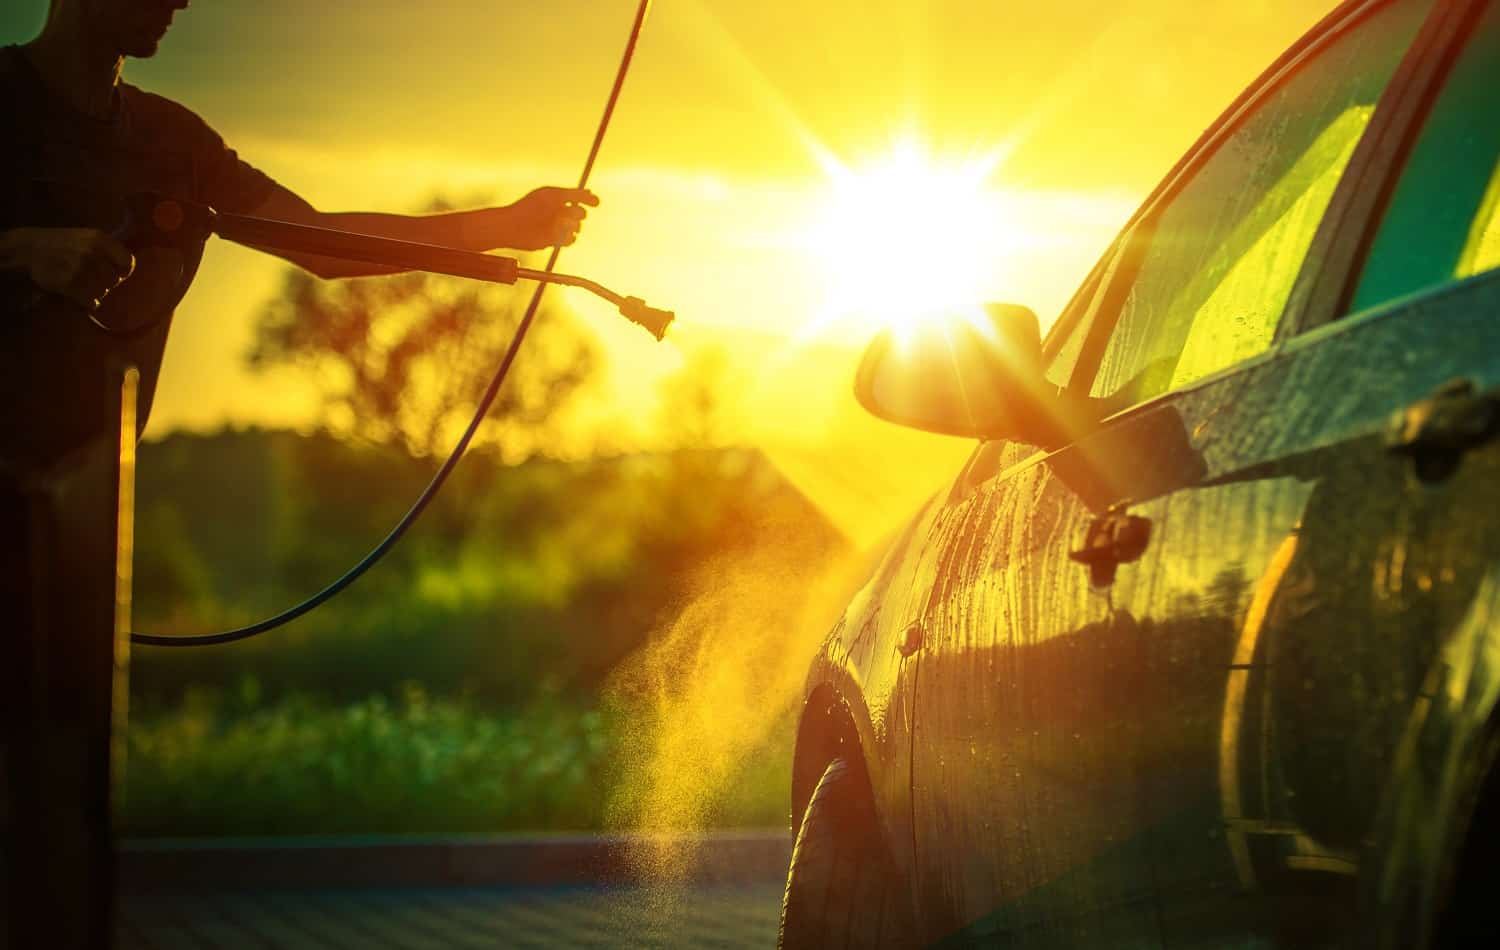 Spring Car Washing During Sunset. High Pressure Water Washing System. Excell Pressure Washer Review